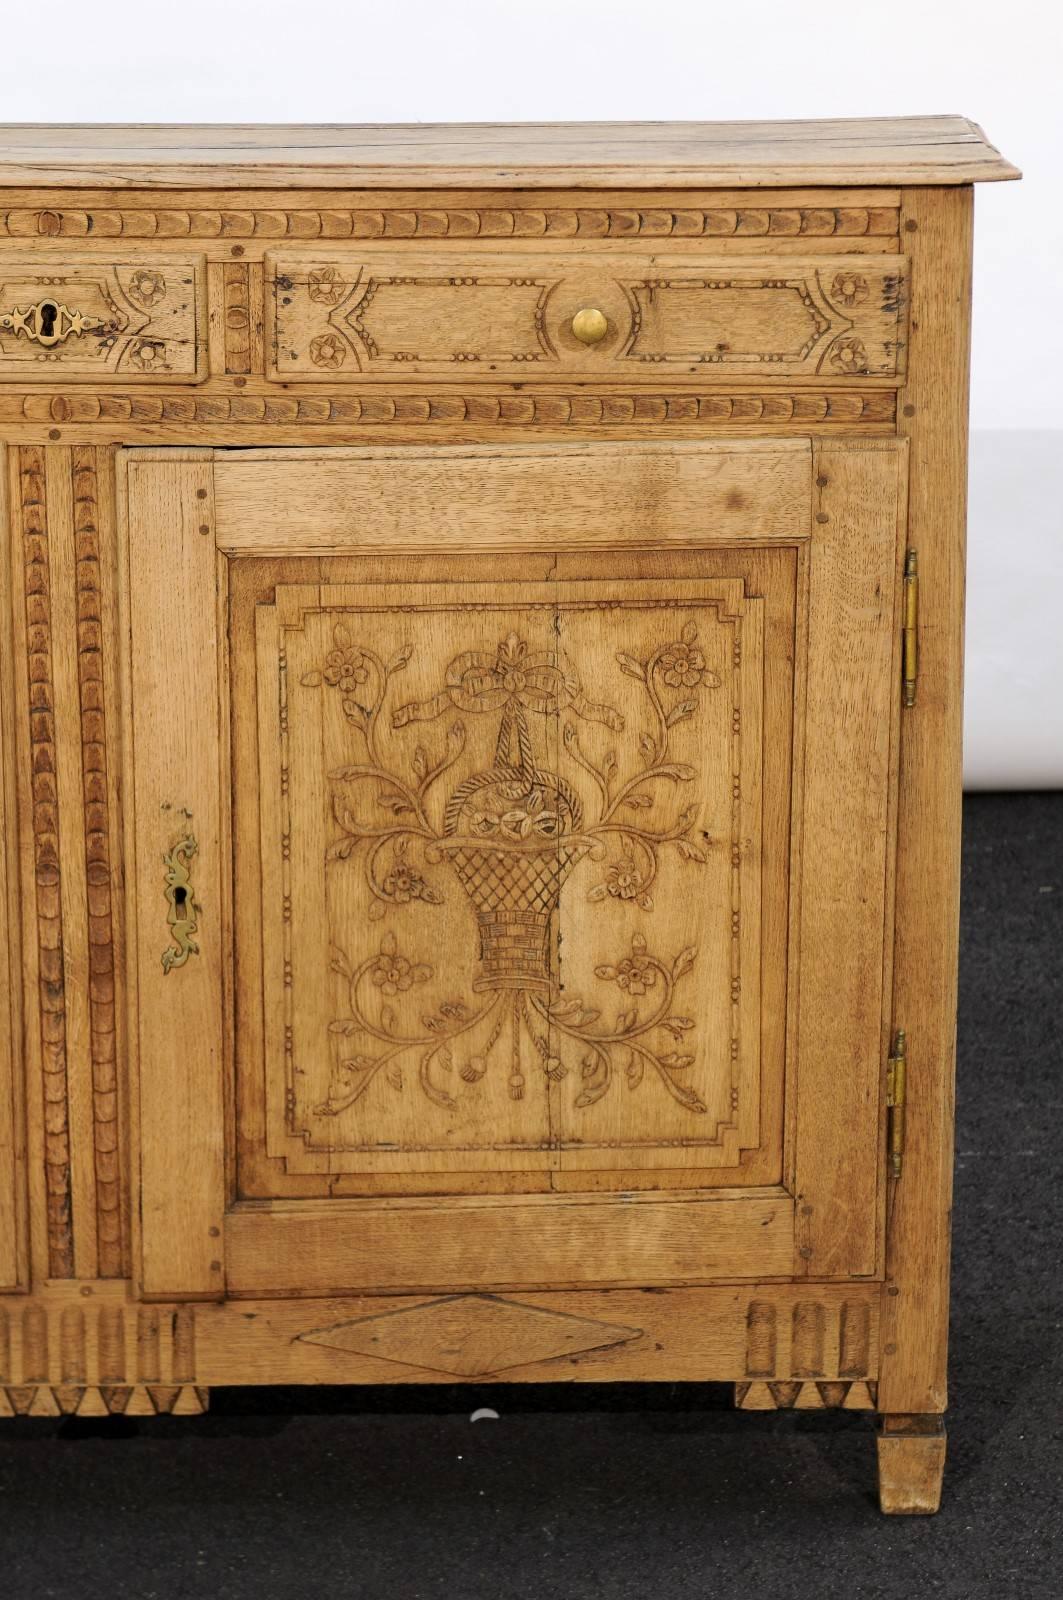 This Louis XVI style carved and stripped oak buffet from the mid-19th century features a rectangular top with canted edges in the front, over three drawers grooved on the side for the runner and two doors. Born in Belgium, this is one of the most